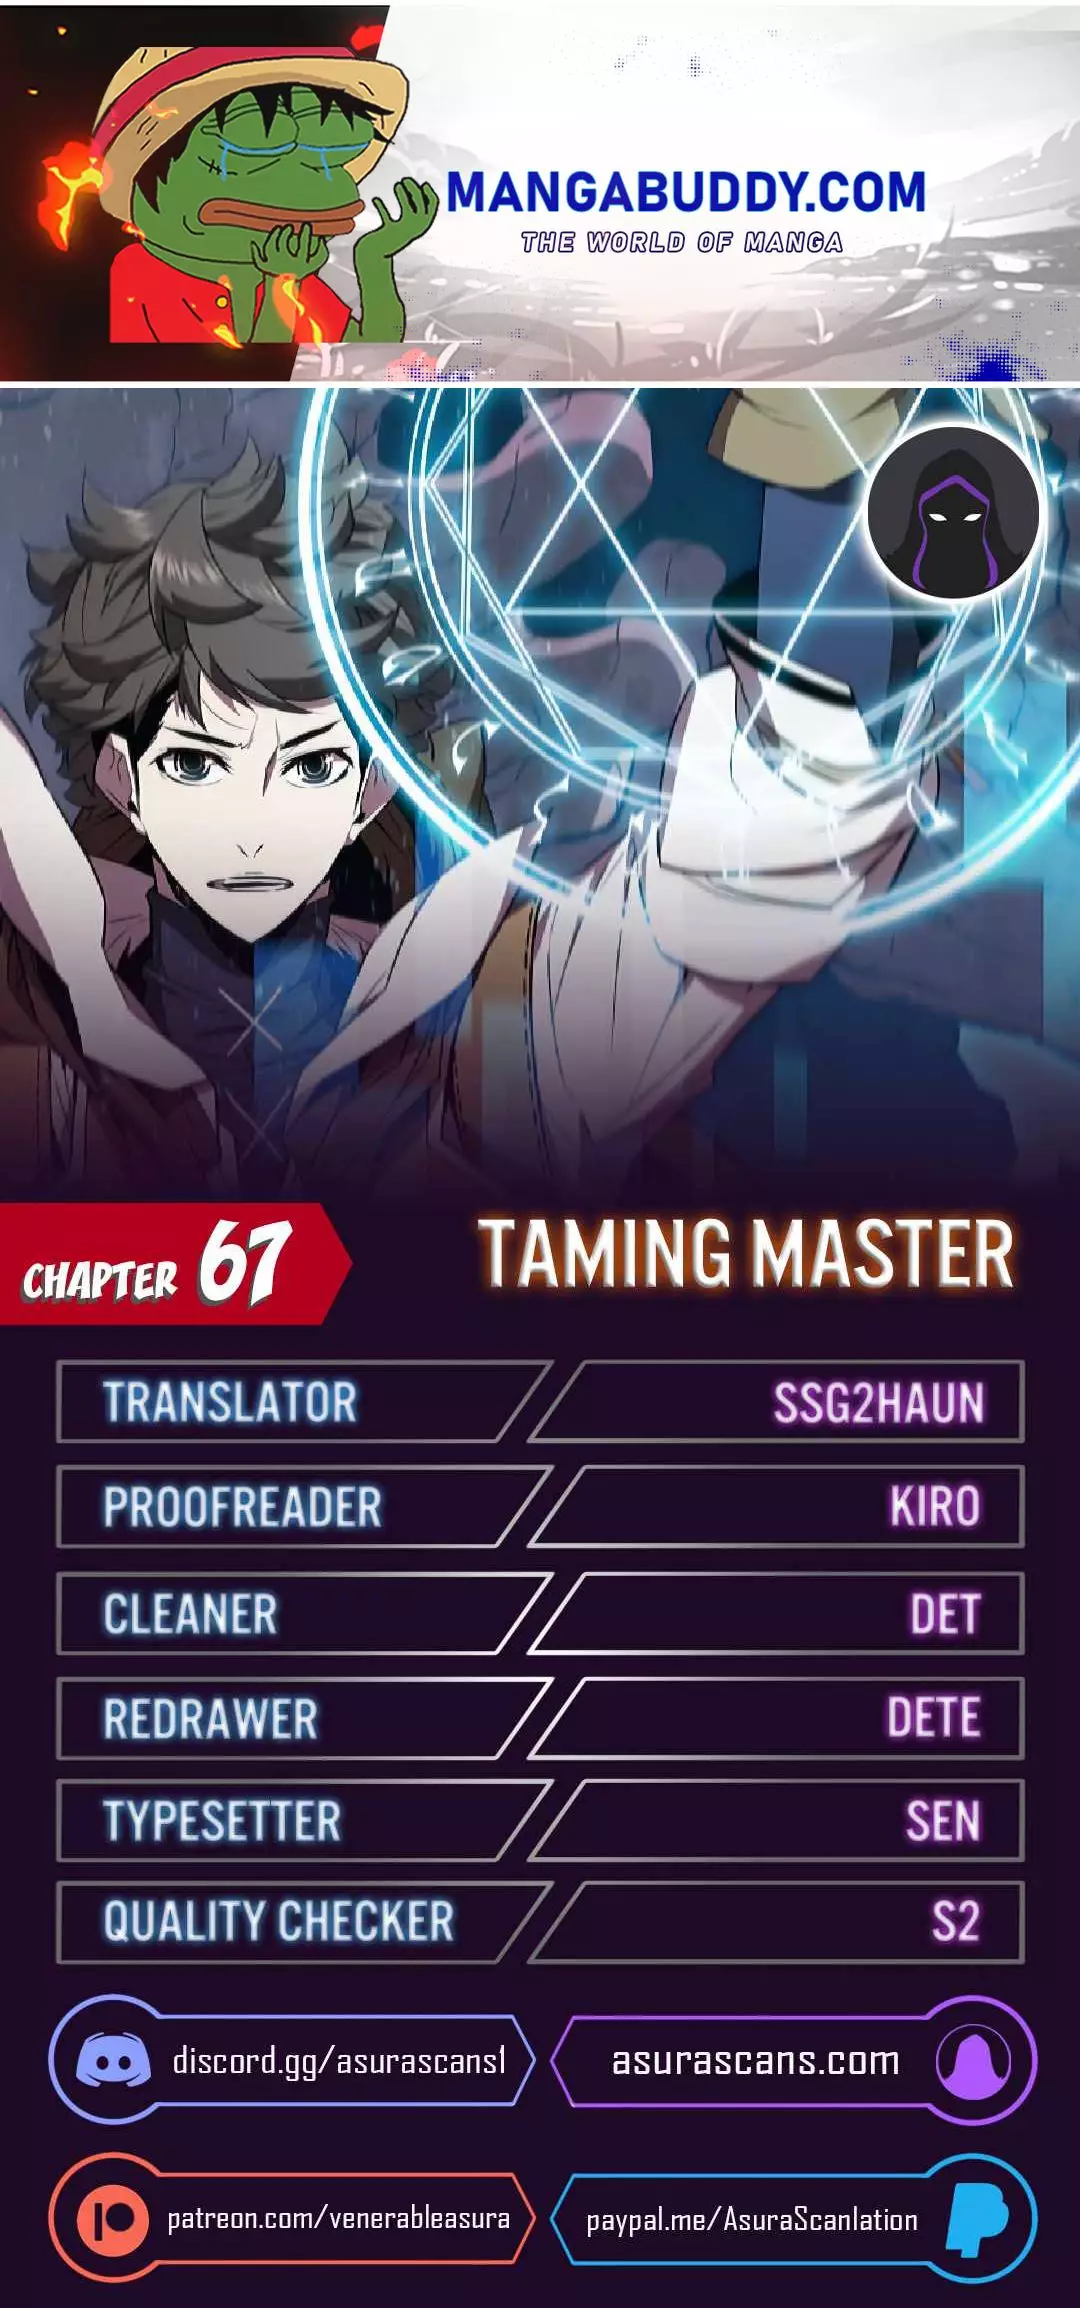 Taming Master - 67 page 1-9ee62a8f